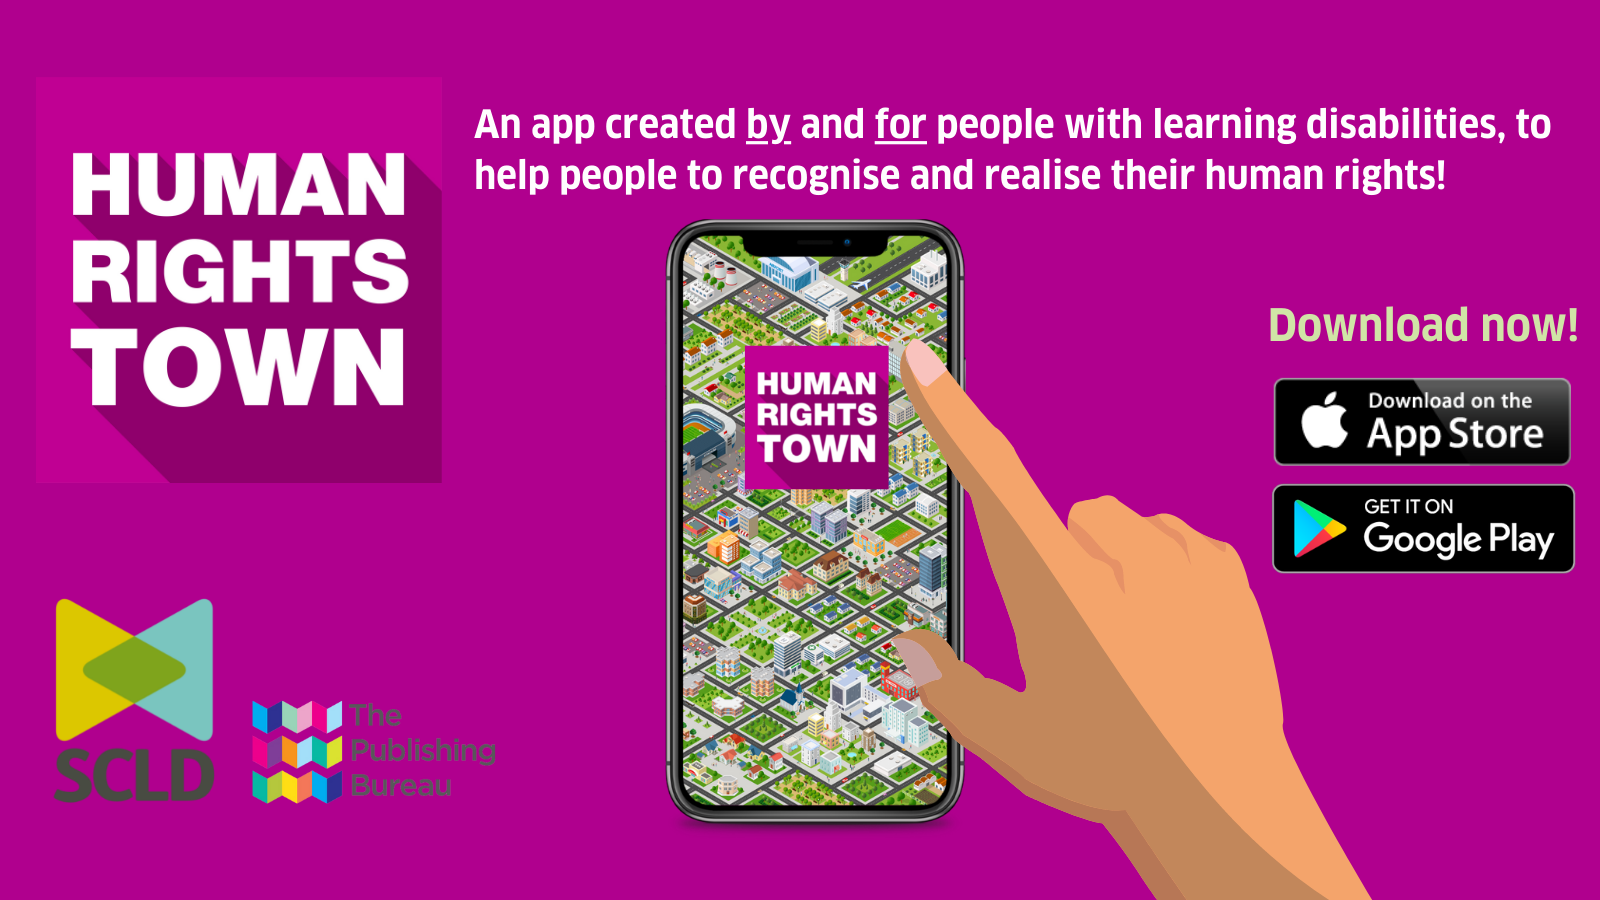 Human Rights Town App Download link